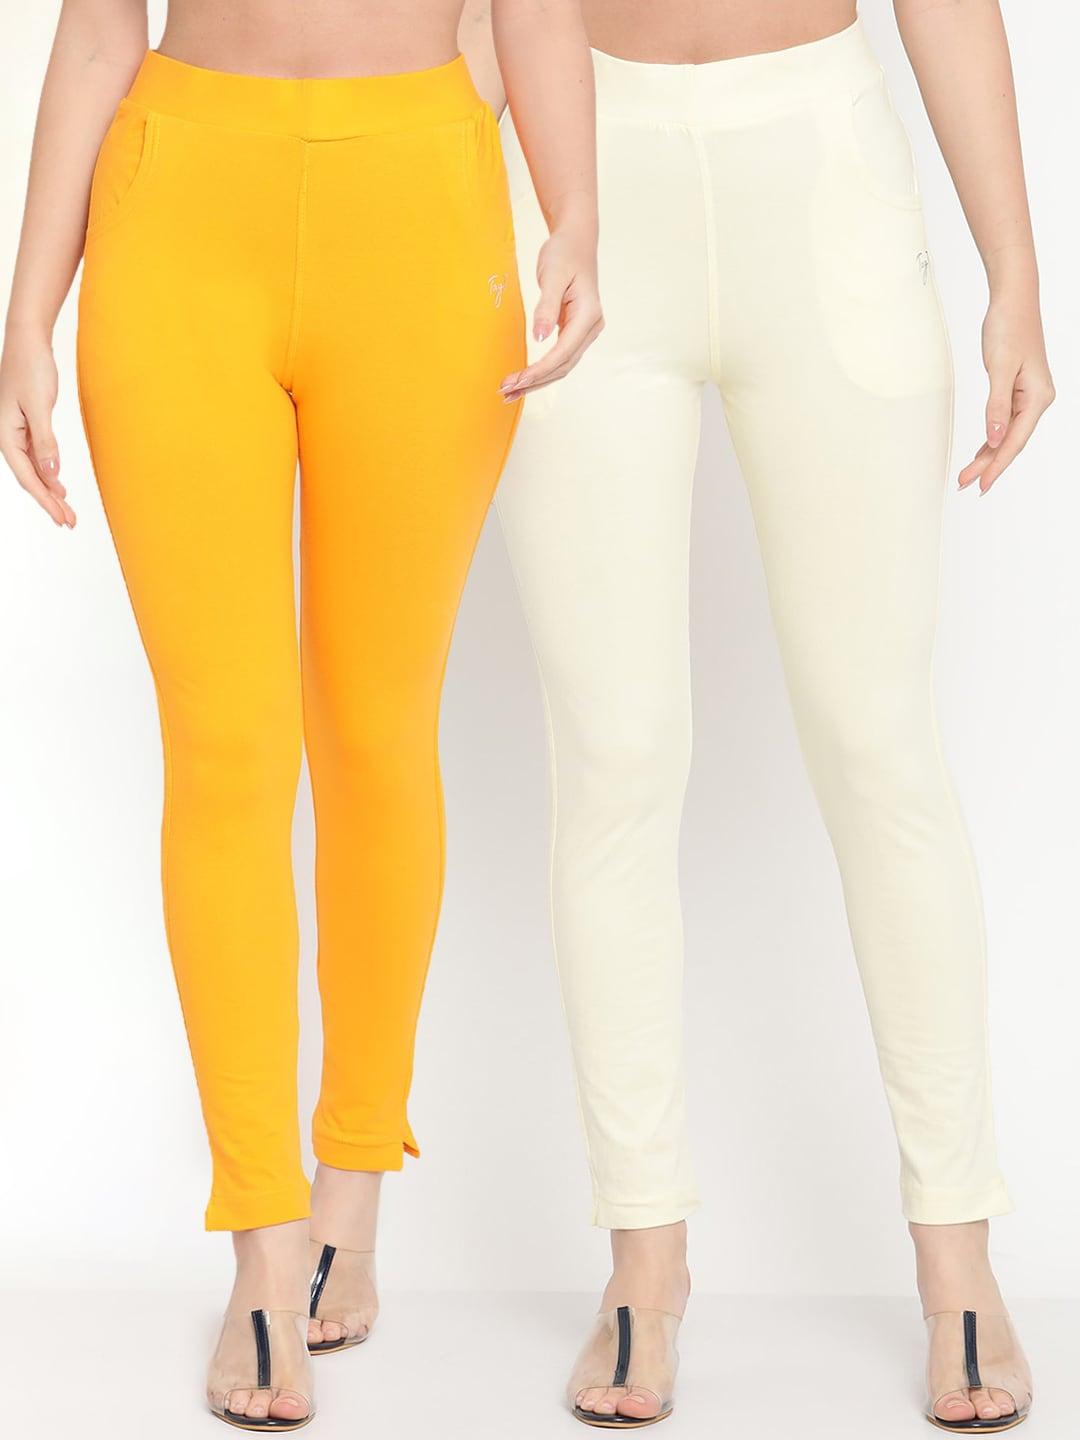 TAG 7 Women White & Yellow Set of 2 Solid Ankle Length Cotton Leggings